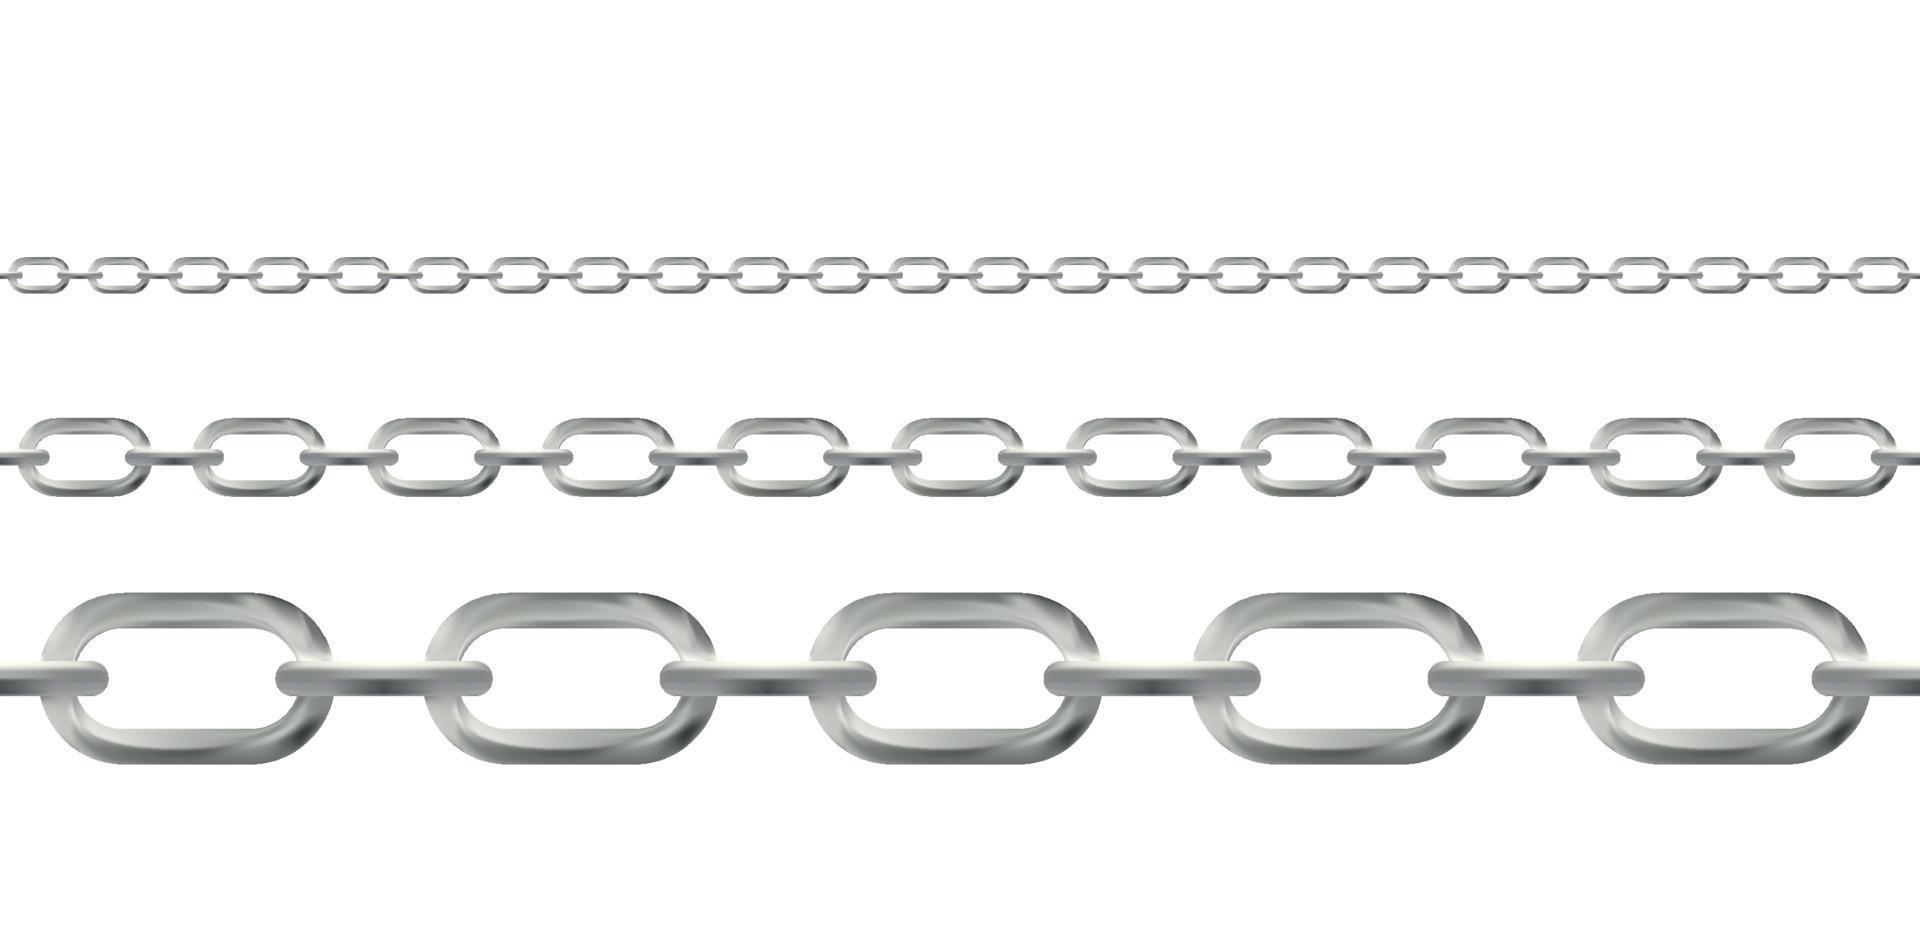 Naturalistic 3D Set of Chain of Silver and Steel Color. Vector Illustration